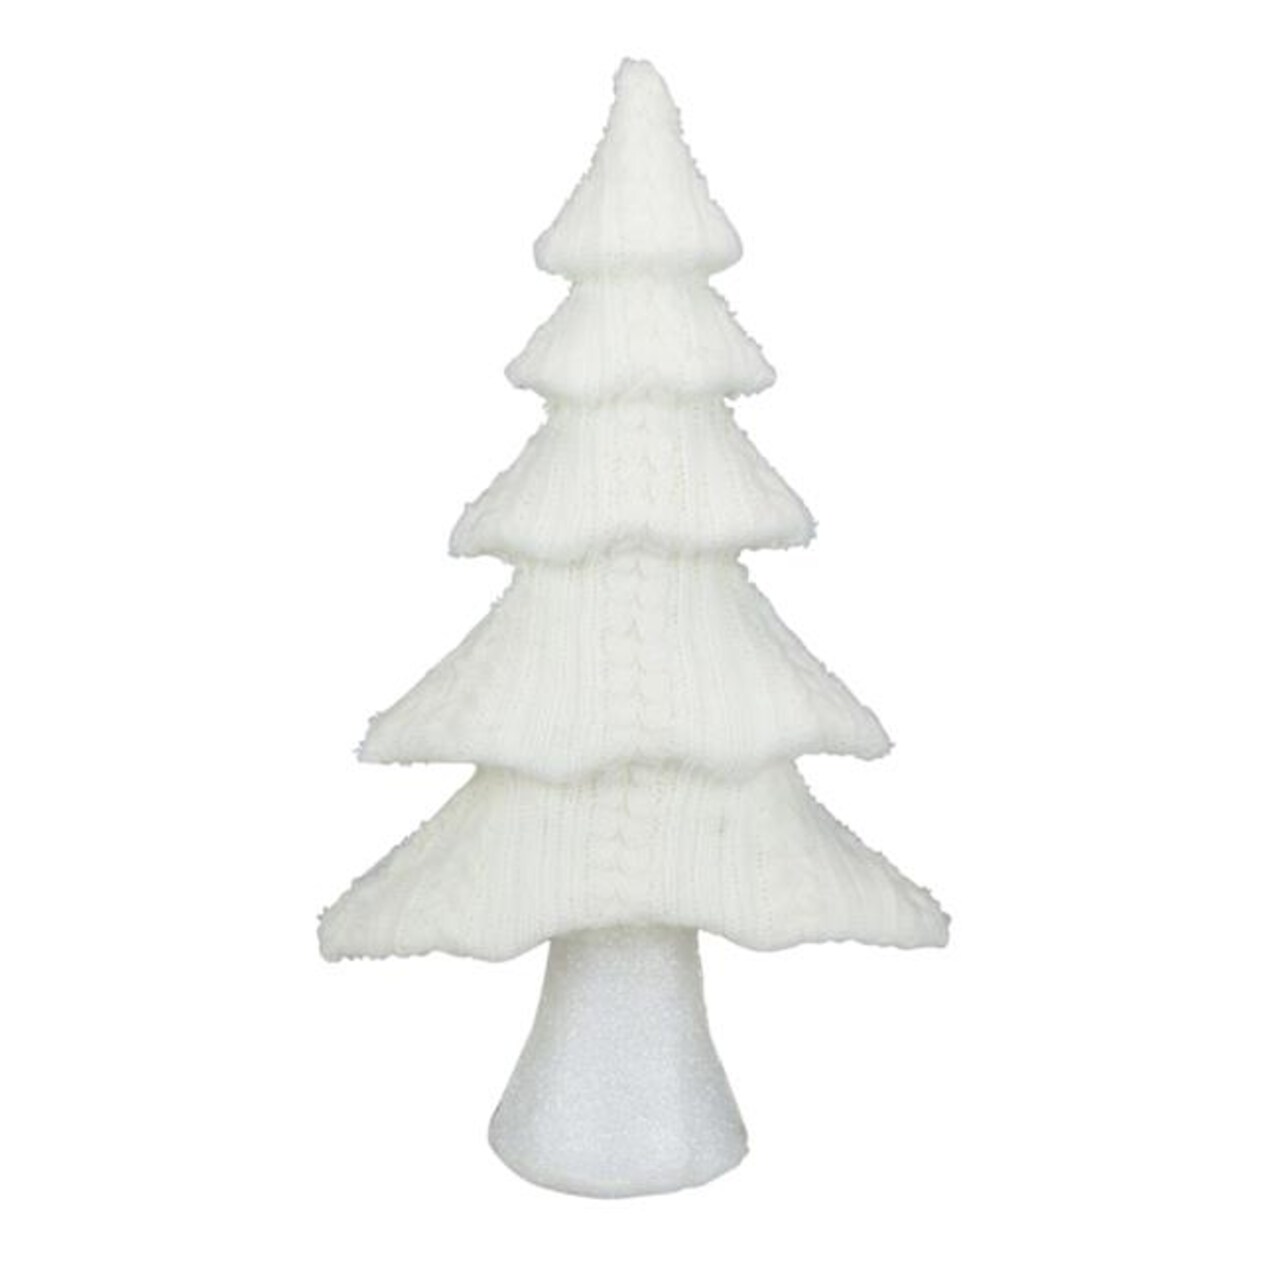 Northlight 34881555 16.75 in. Cream Cable Knit Christmas Tree Tabletop Decoration